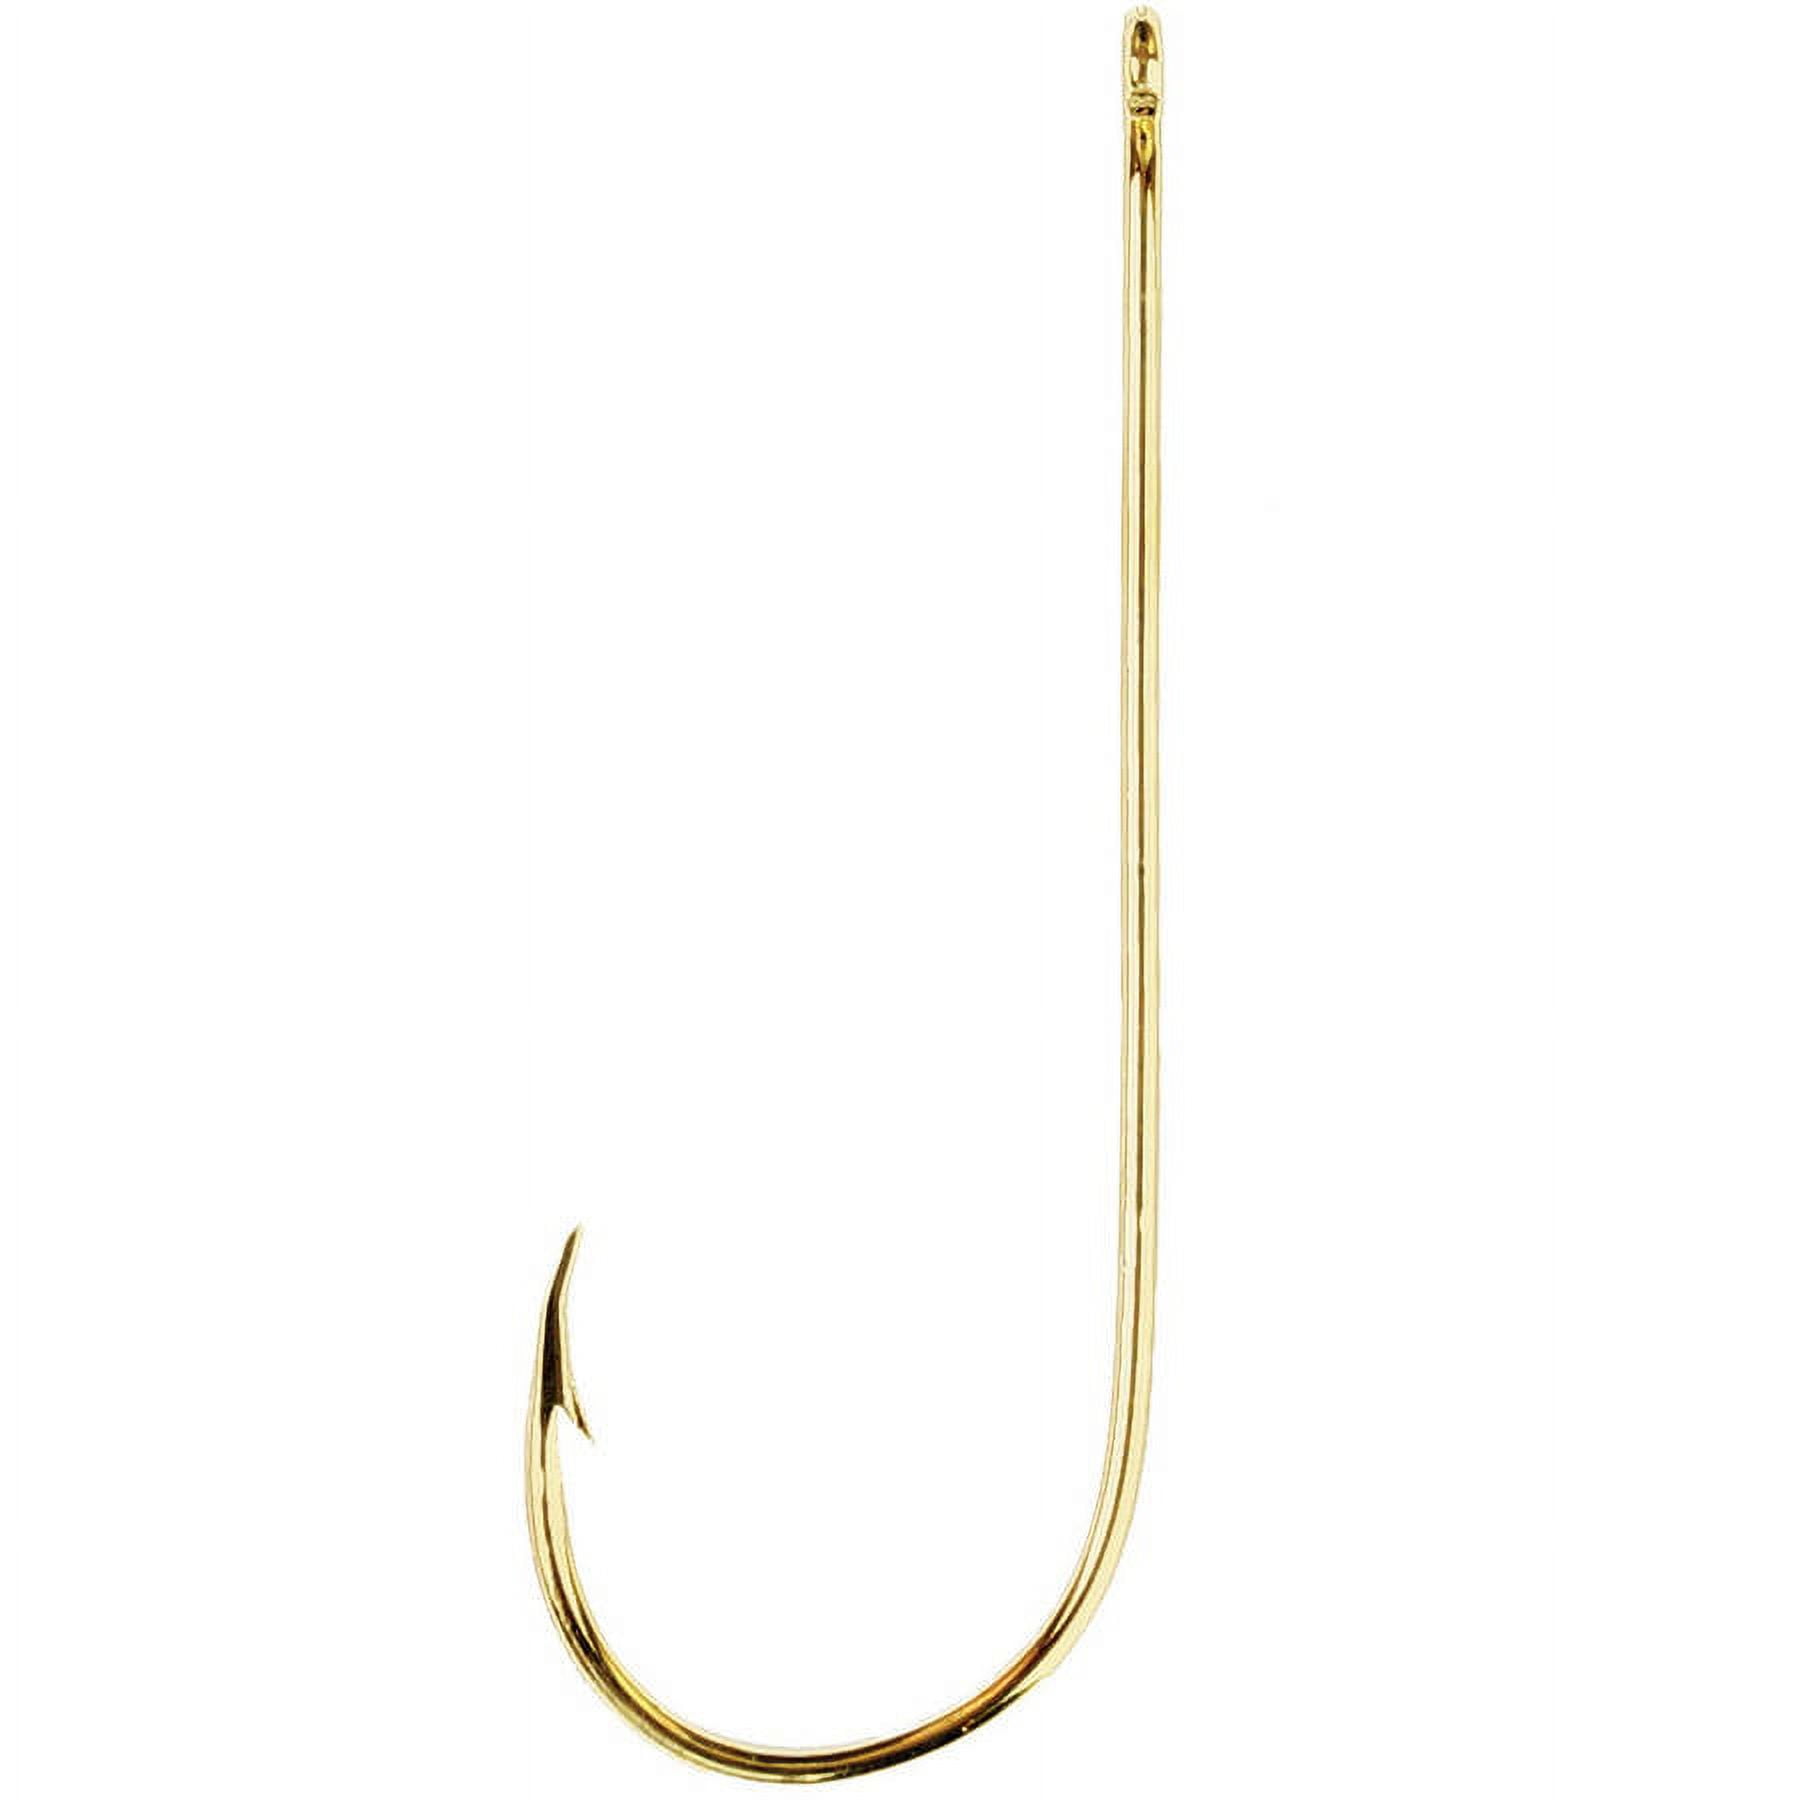 Eagle Claw 202AH-8 Aberdeen Hook, Gold, Size 8, 10 Pack